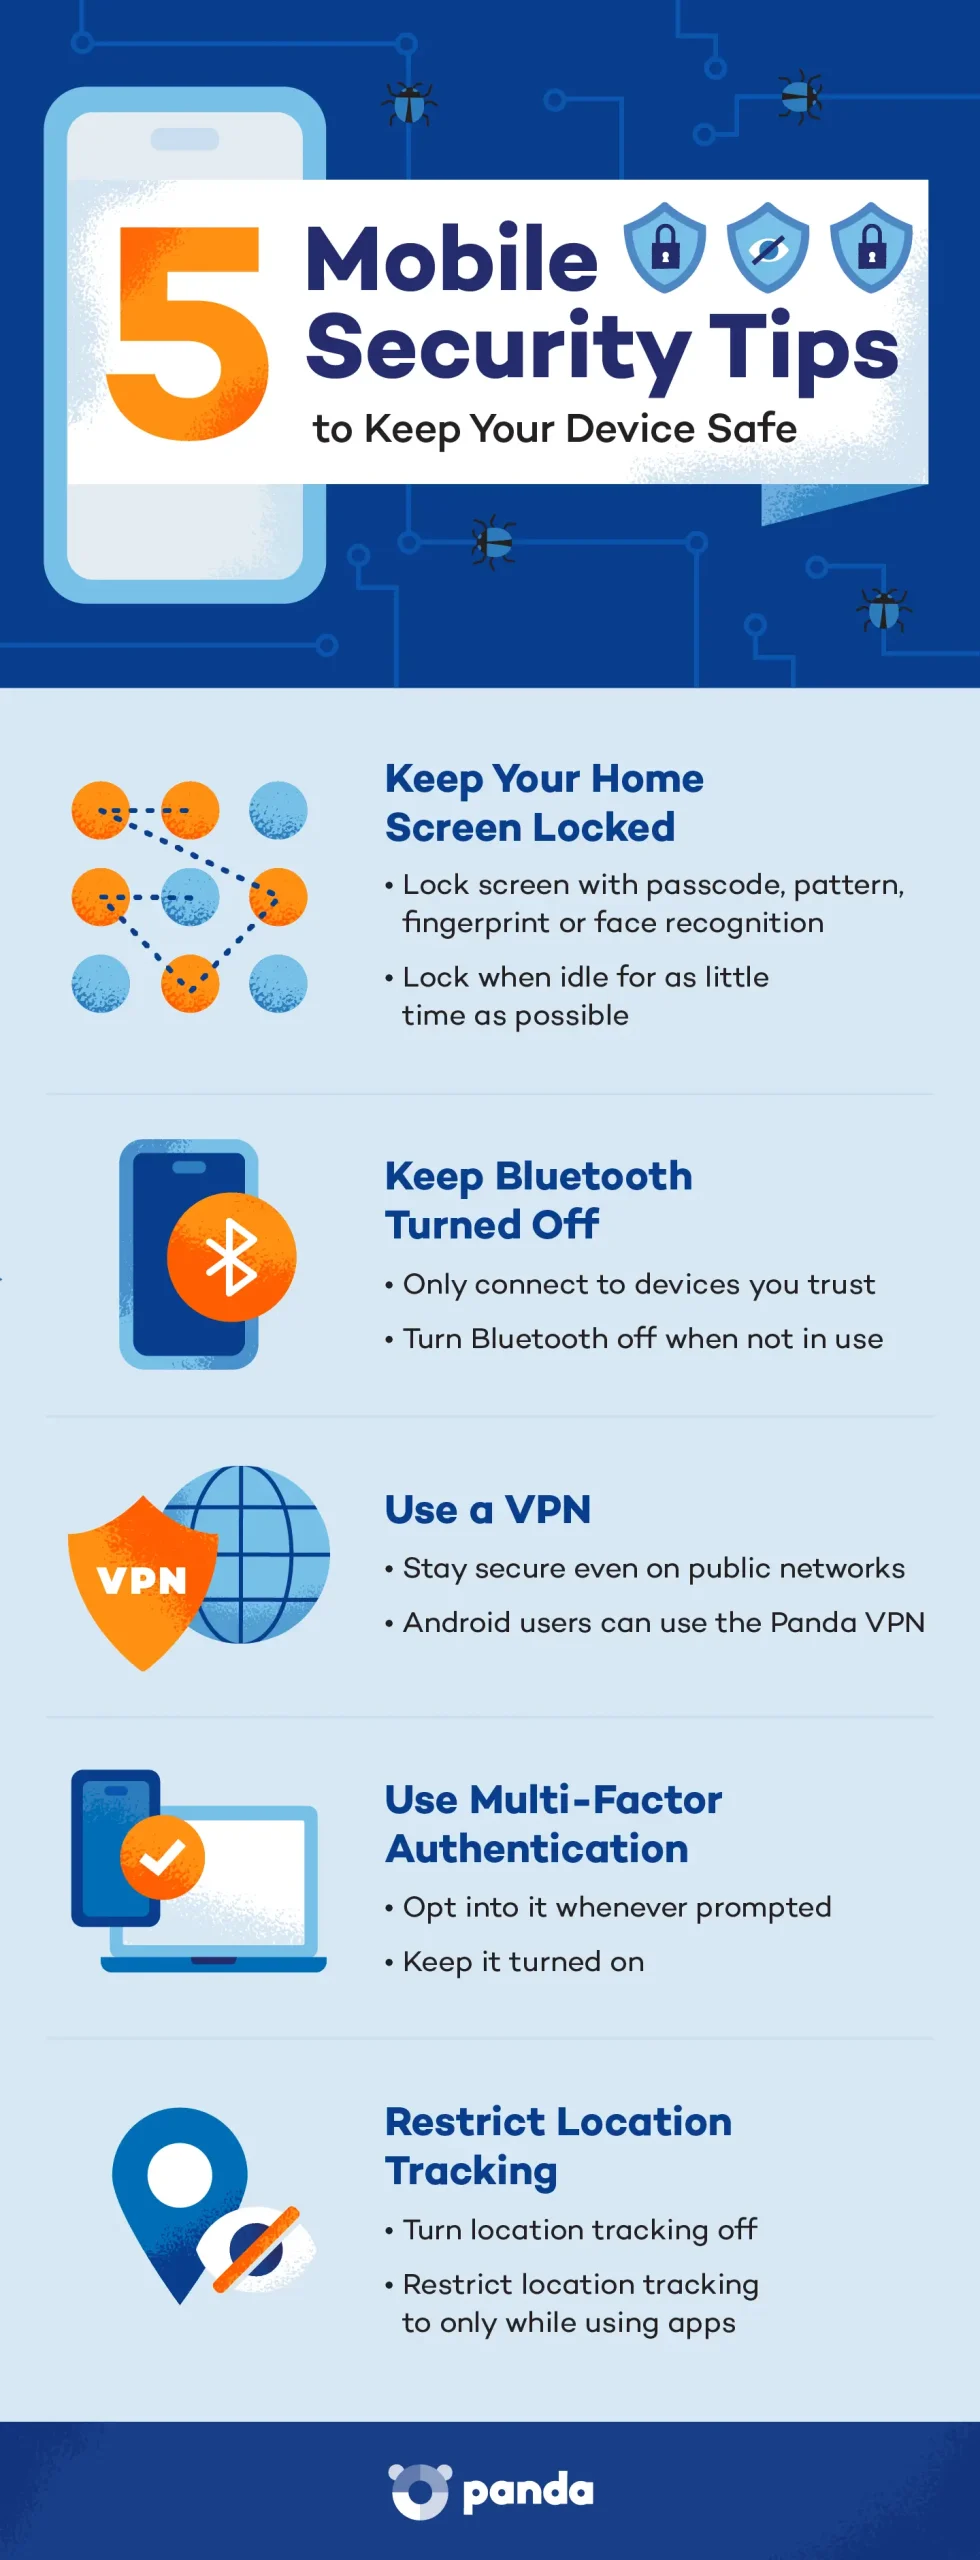 Graphic showing mobile security tips